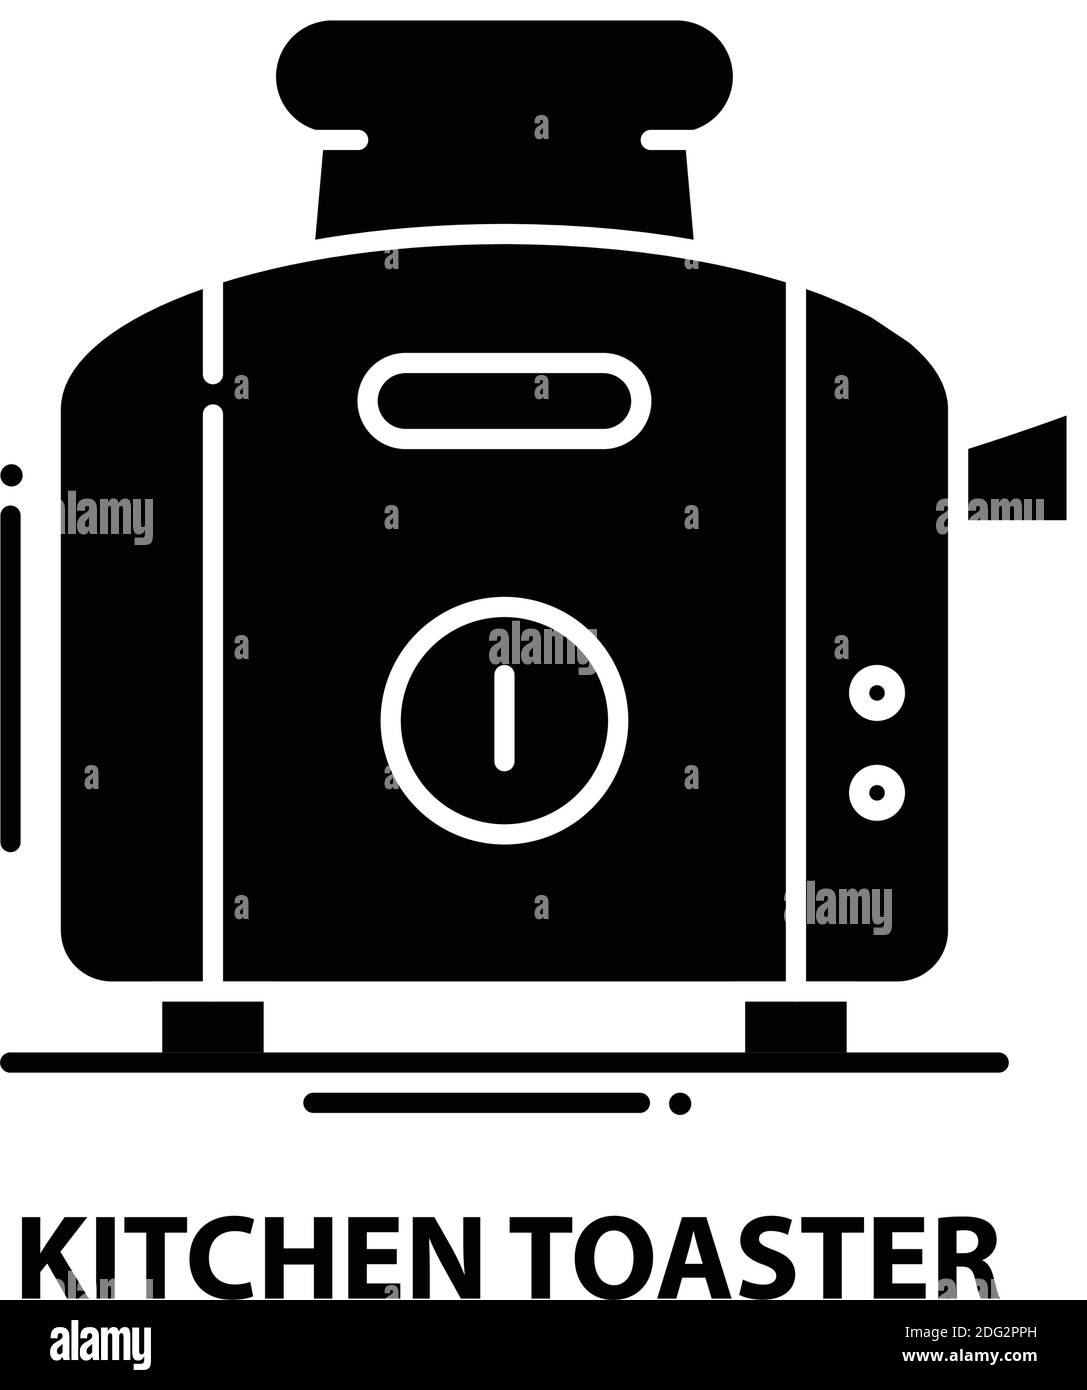 kitchen toaster icon, black vector sign with editable strokes, concept illustration Stock Vector